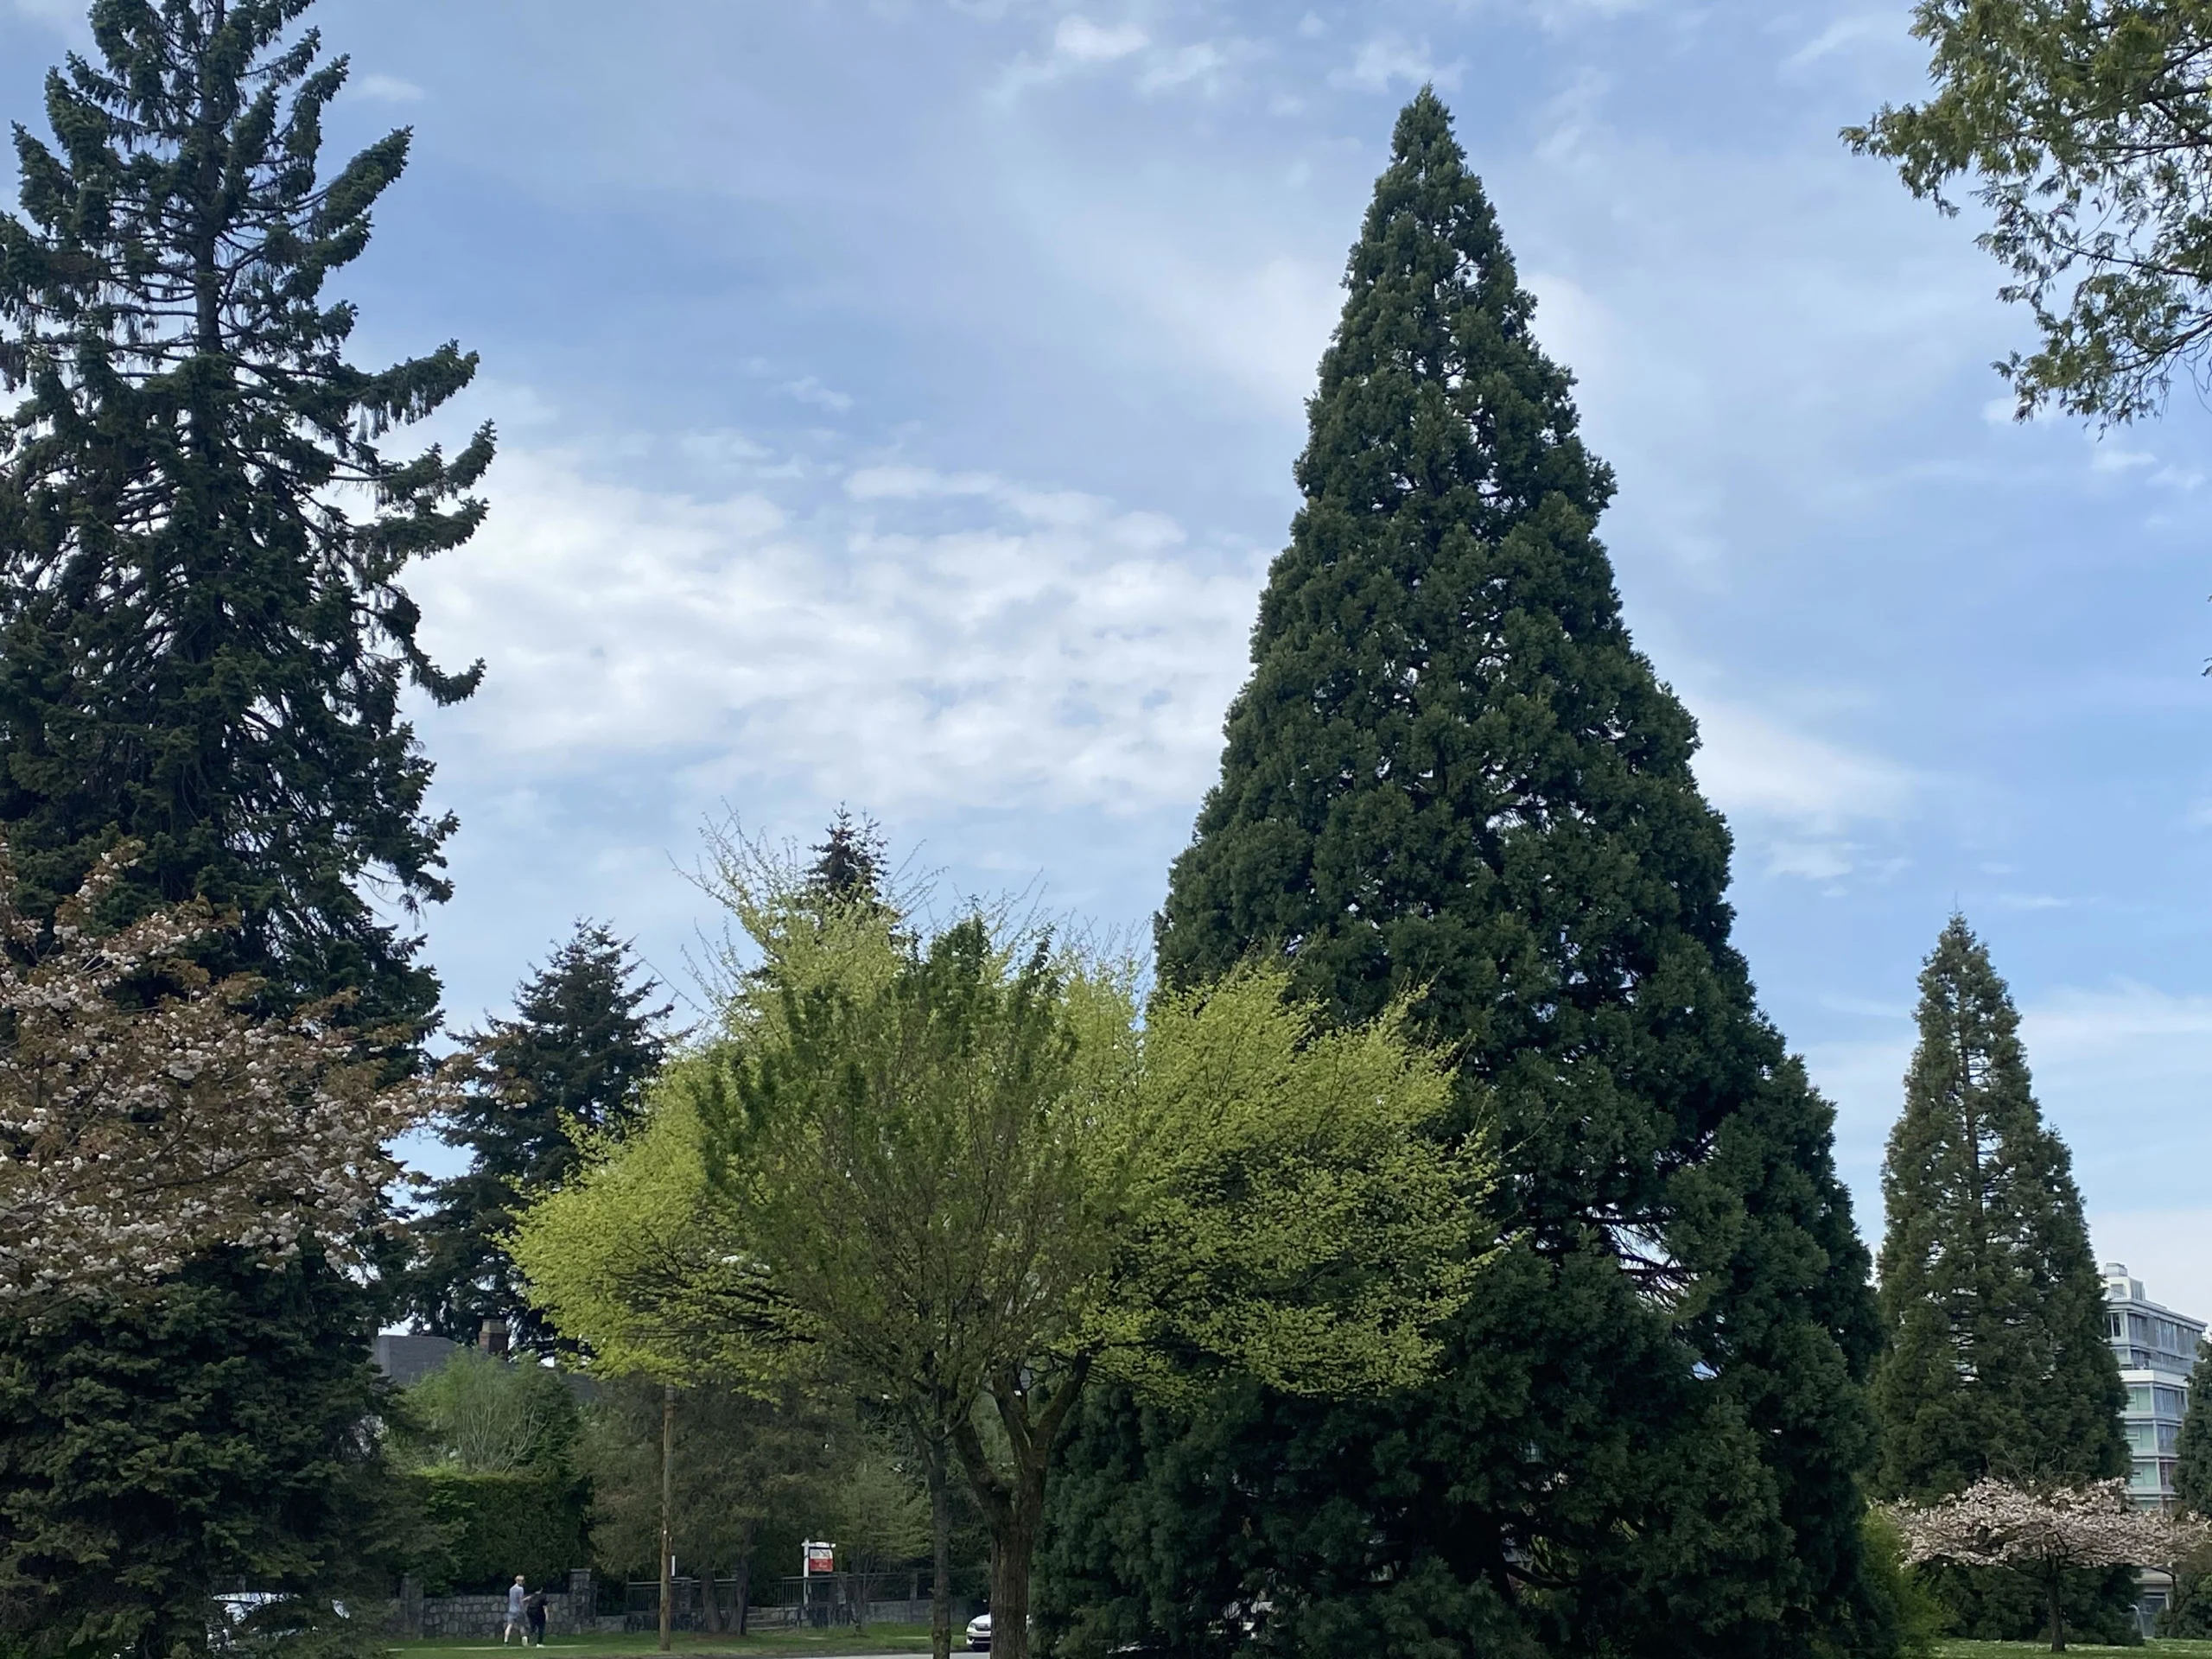 Vancouver has a secret climbing tree, and we've found it